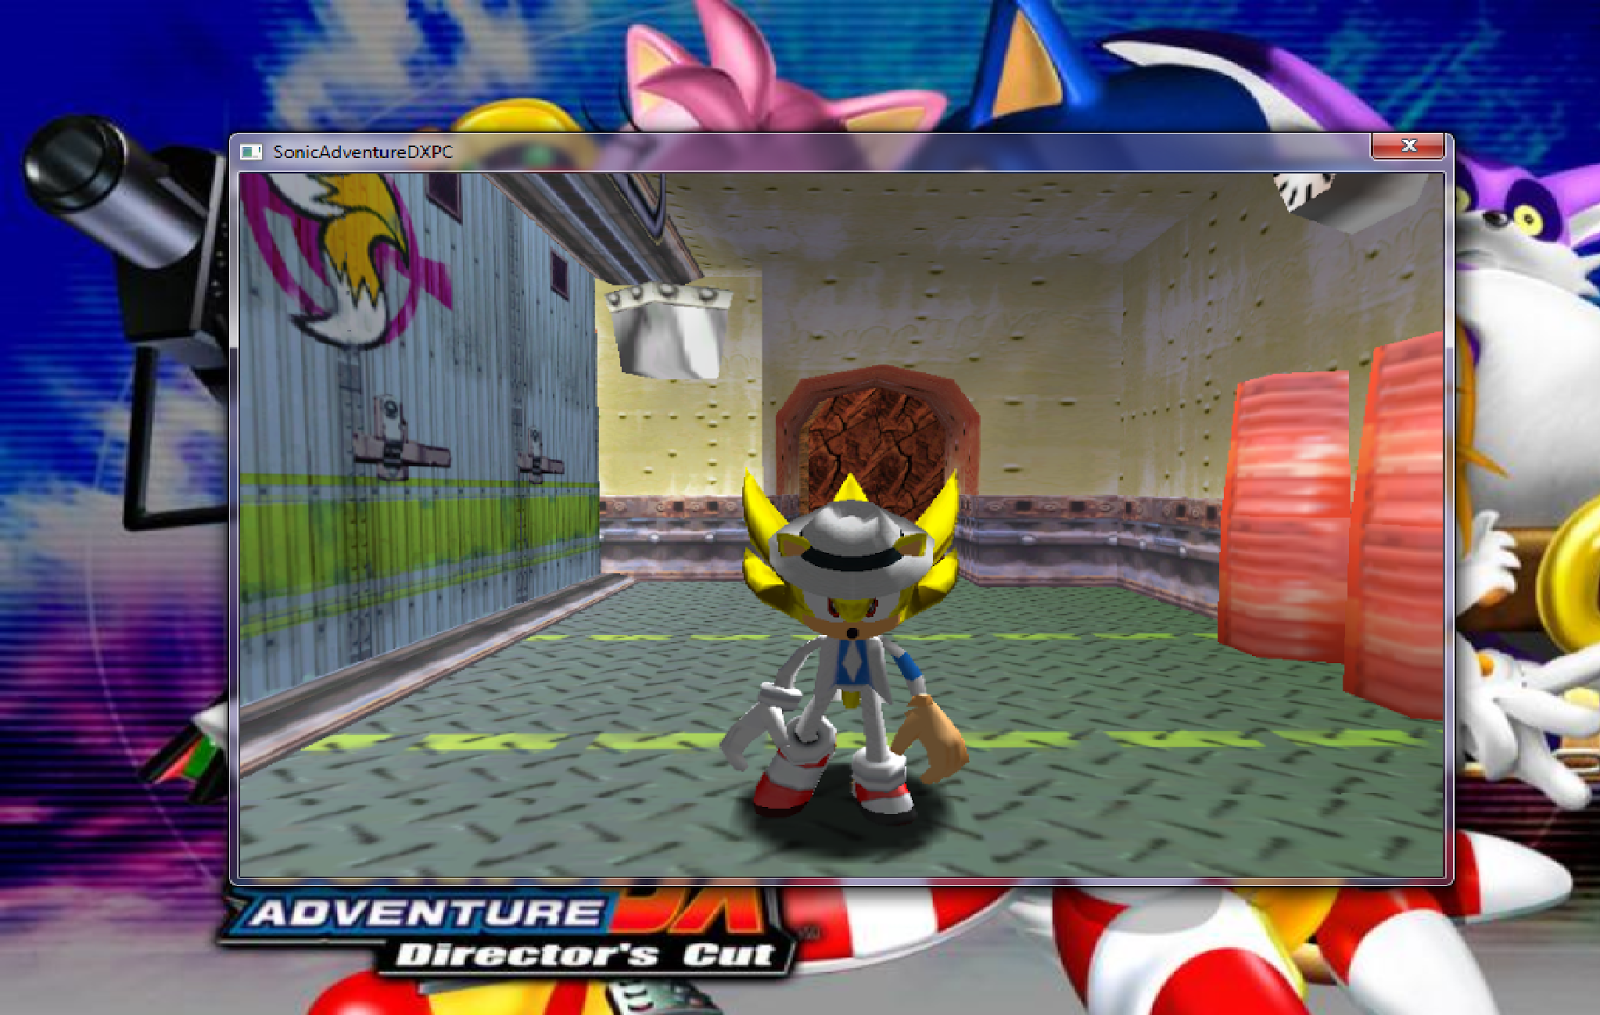 Image 17 - Total SA2 Style mod for Sonic Adventure DX - Mod DB